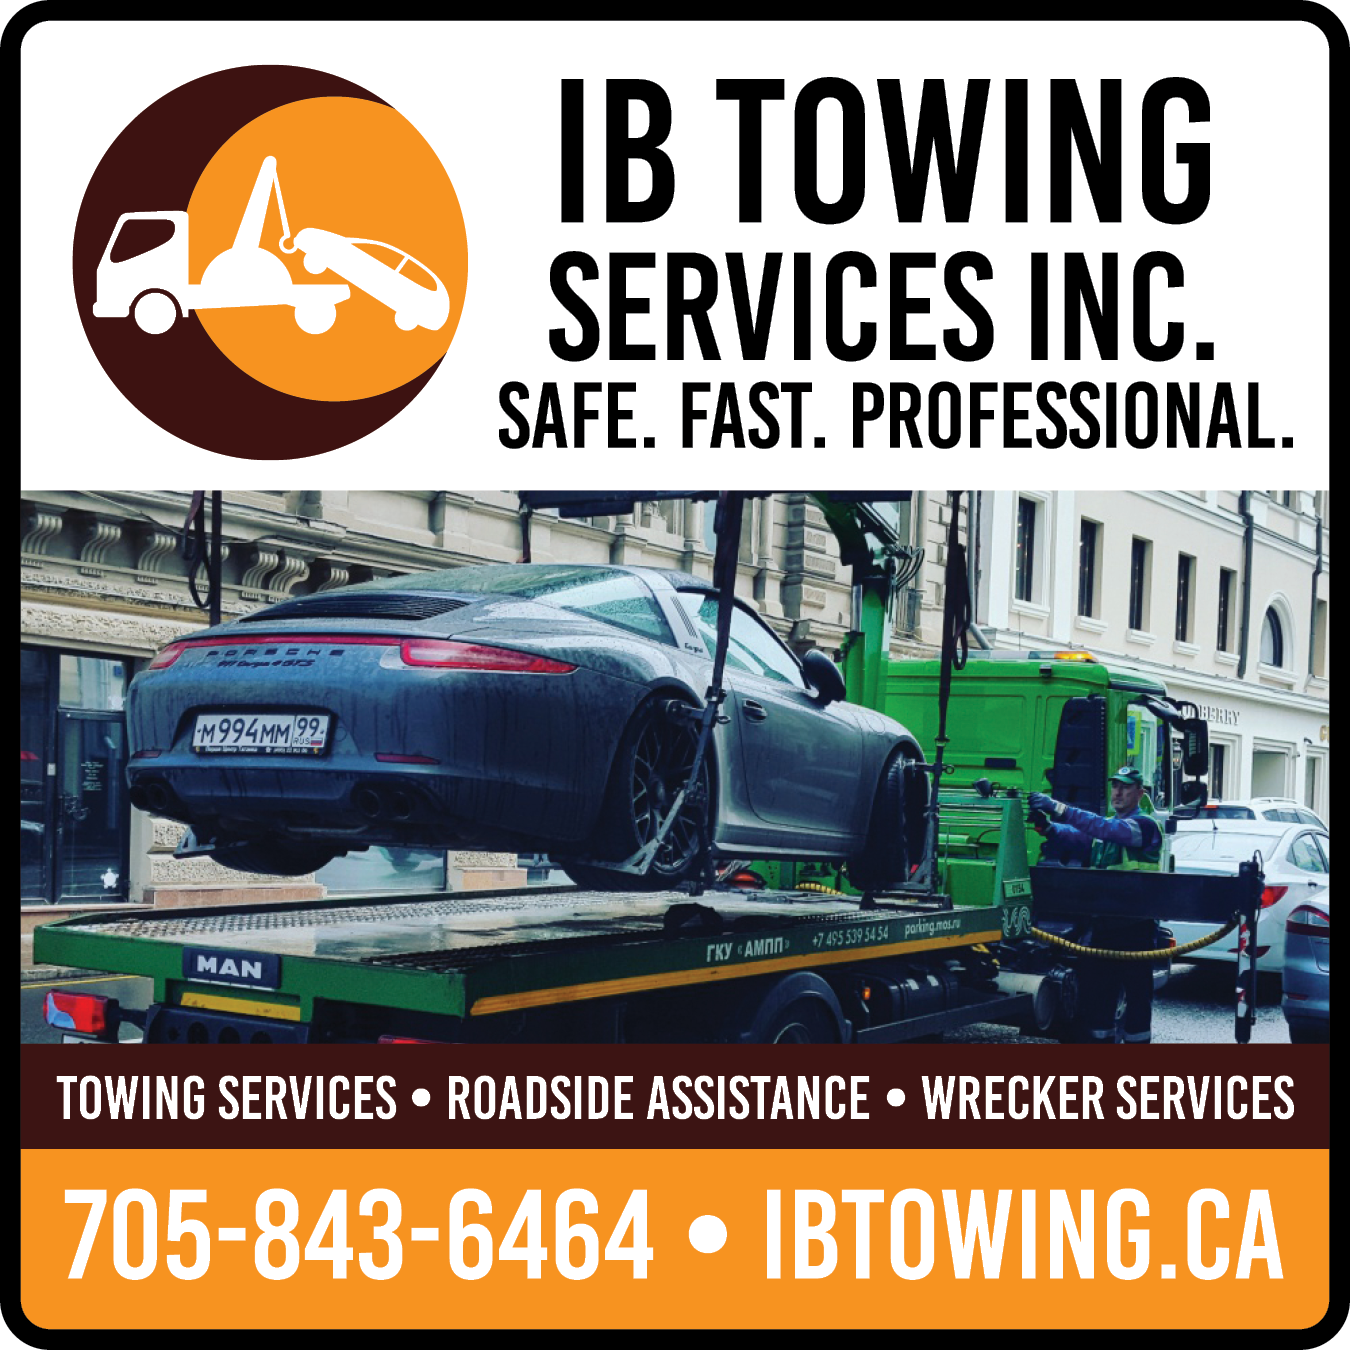 IB Towing Services Inc.